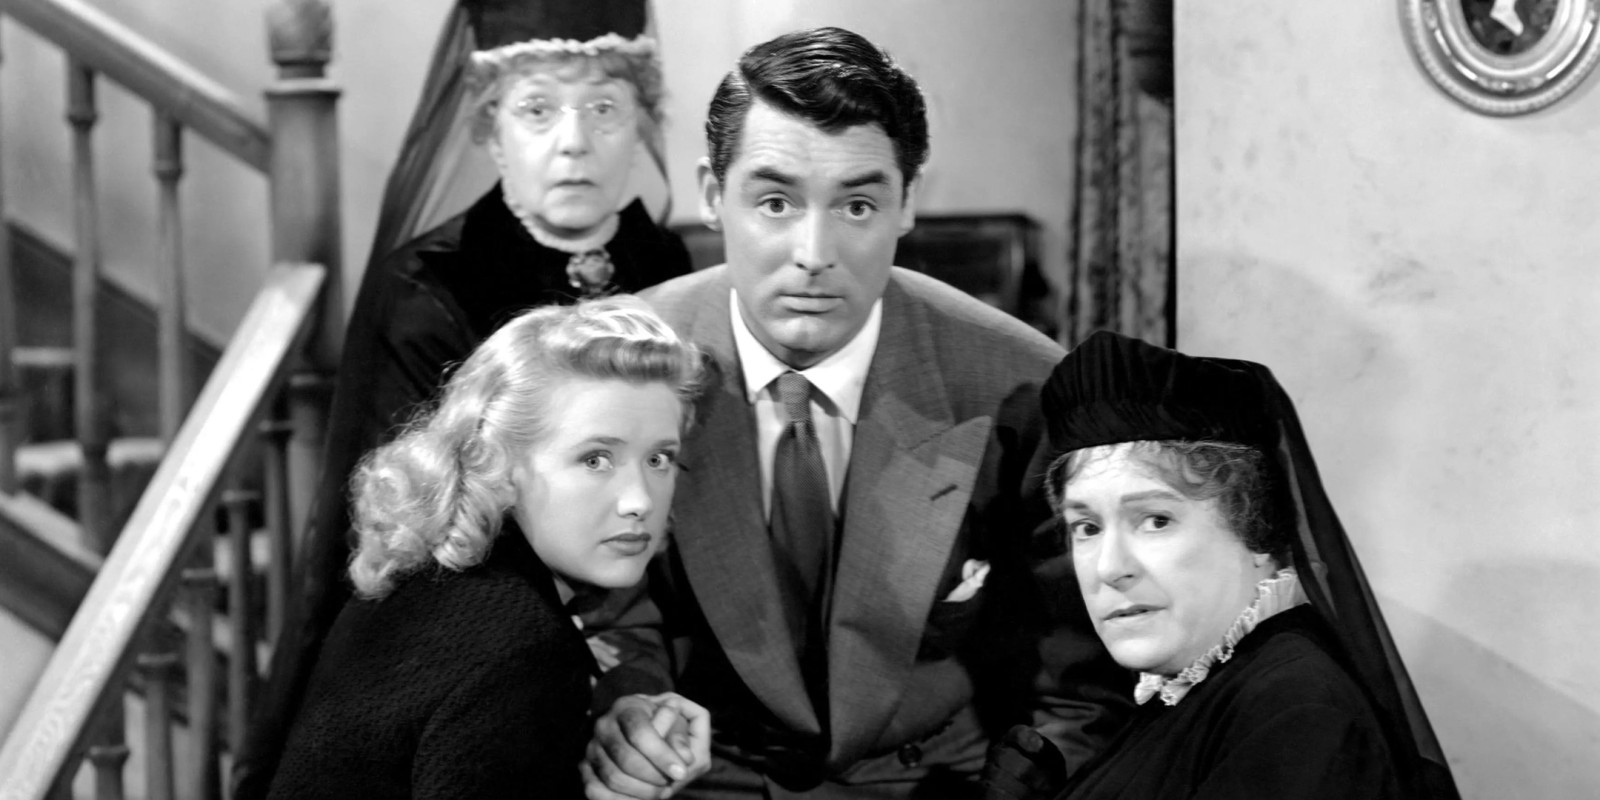 ARSENIC AND OLD LACE (1944)